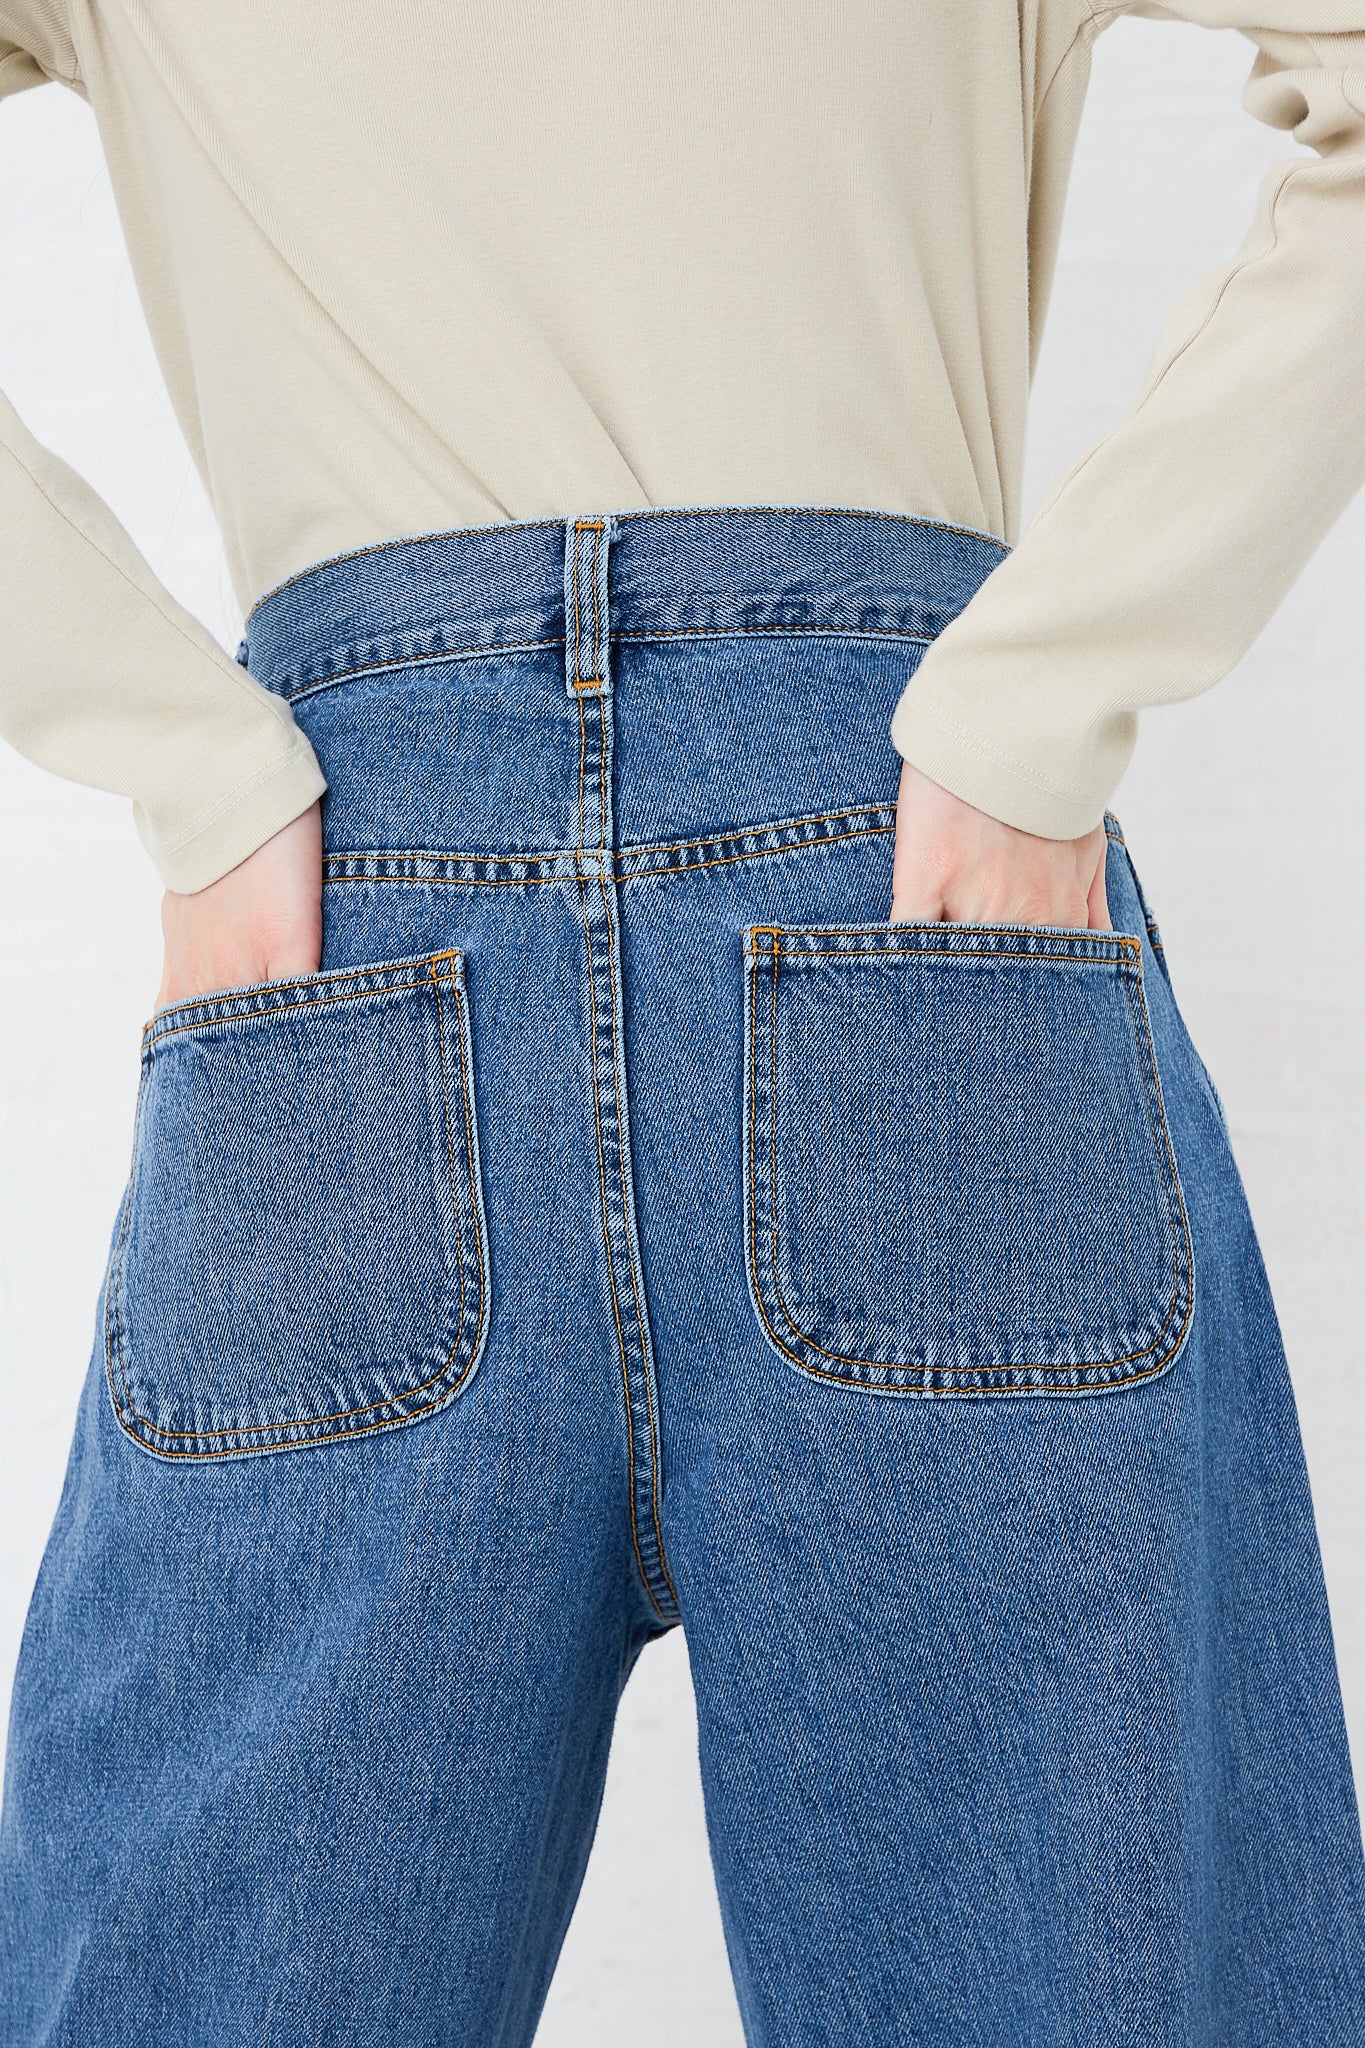 The back view of a woman wearing a pair of Jesse Kamm Japanese Denim California Wide jeans in Cowboy Blue with pockets, embodying the essence of a minimalist wardrobe.